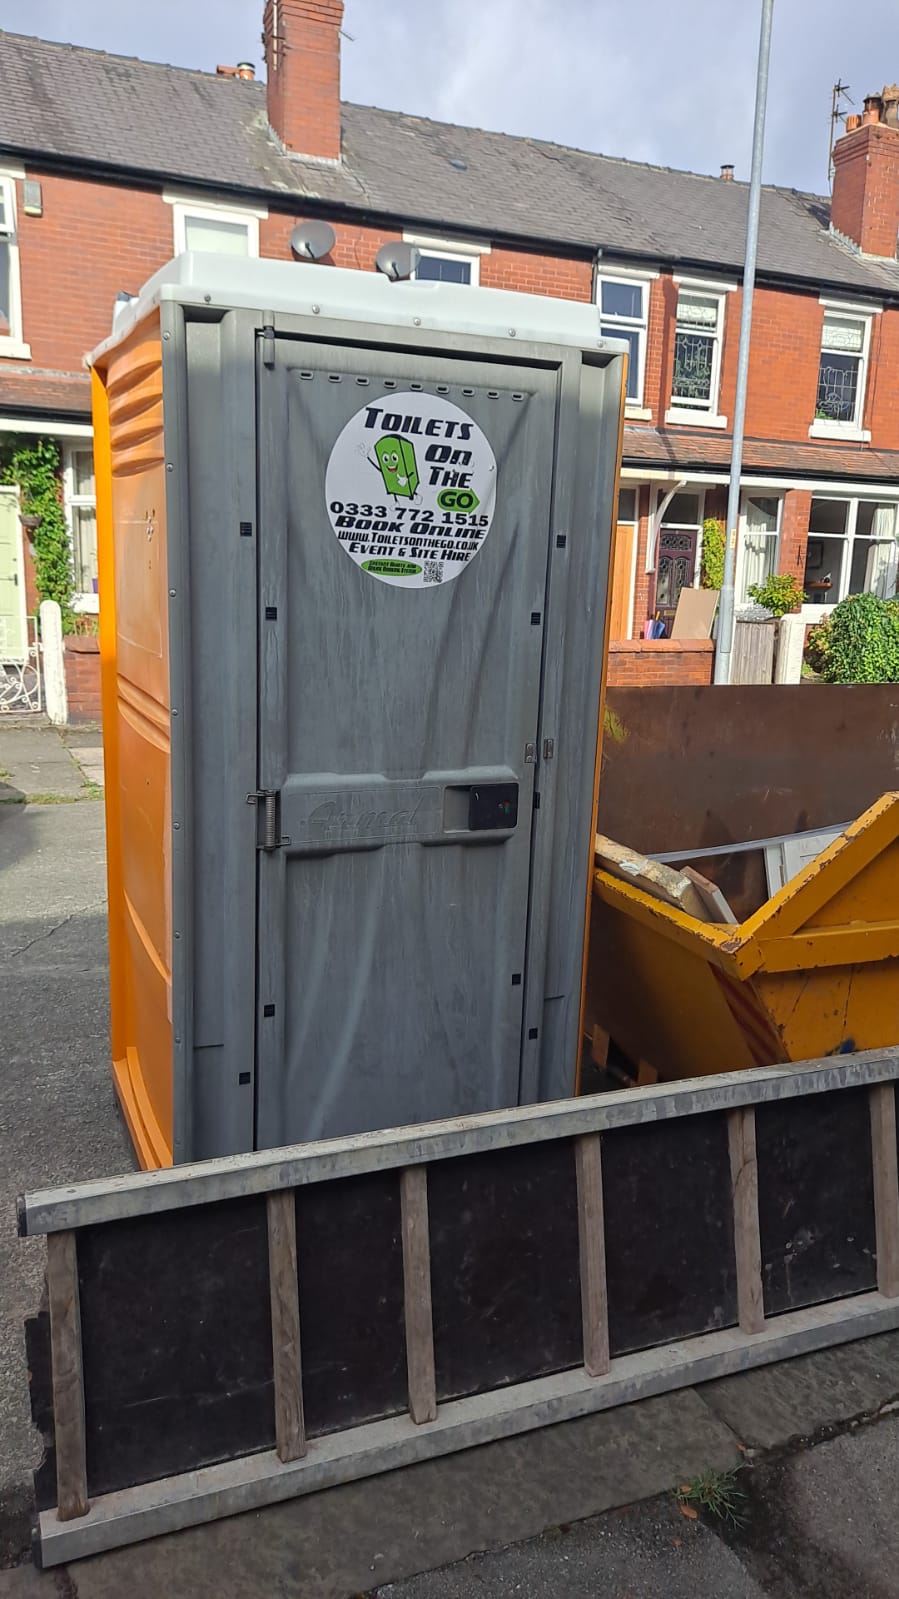 Gallery | Portable Toilet Loo Hire Rental Company in North West uk and Manchester gallery image 68